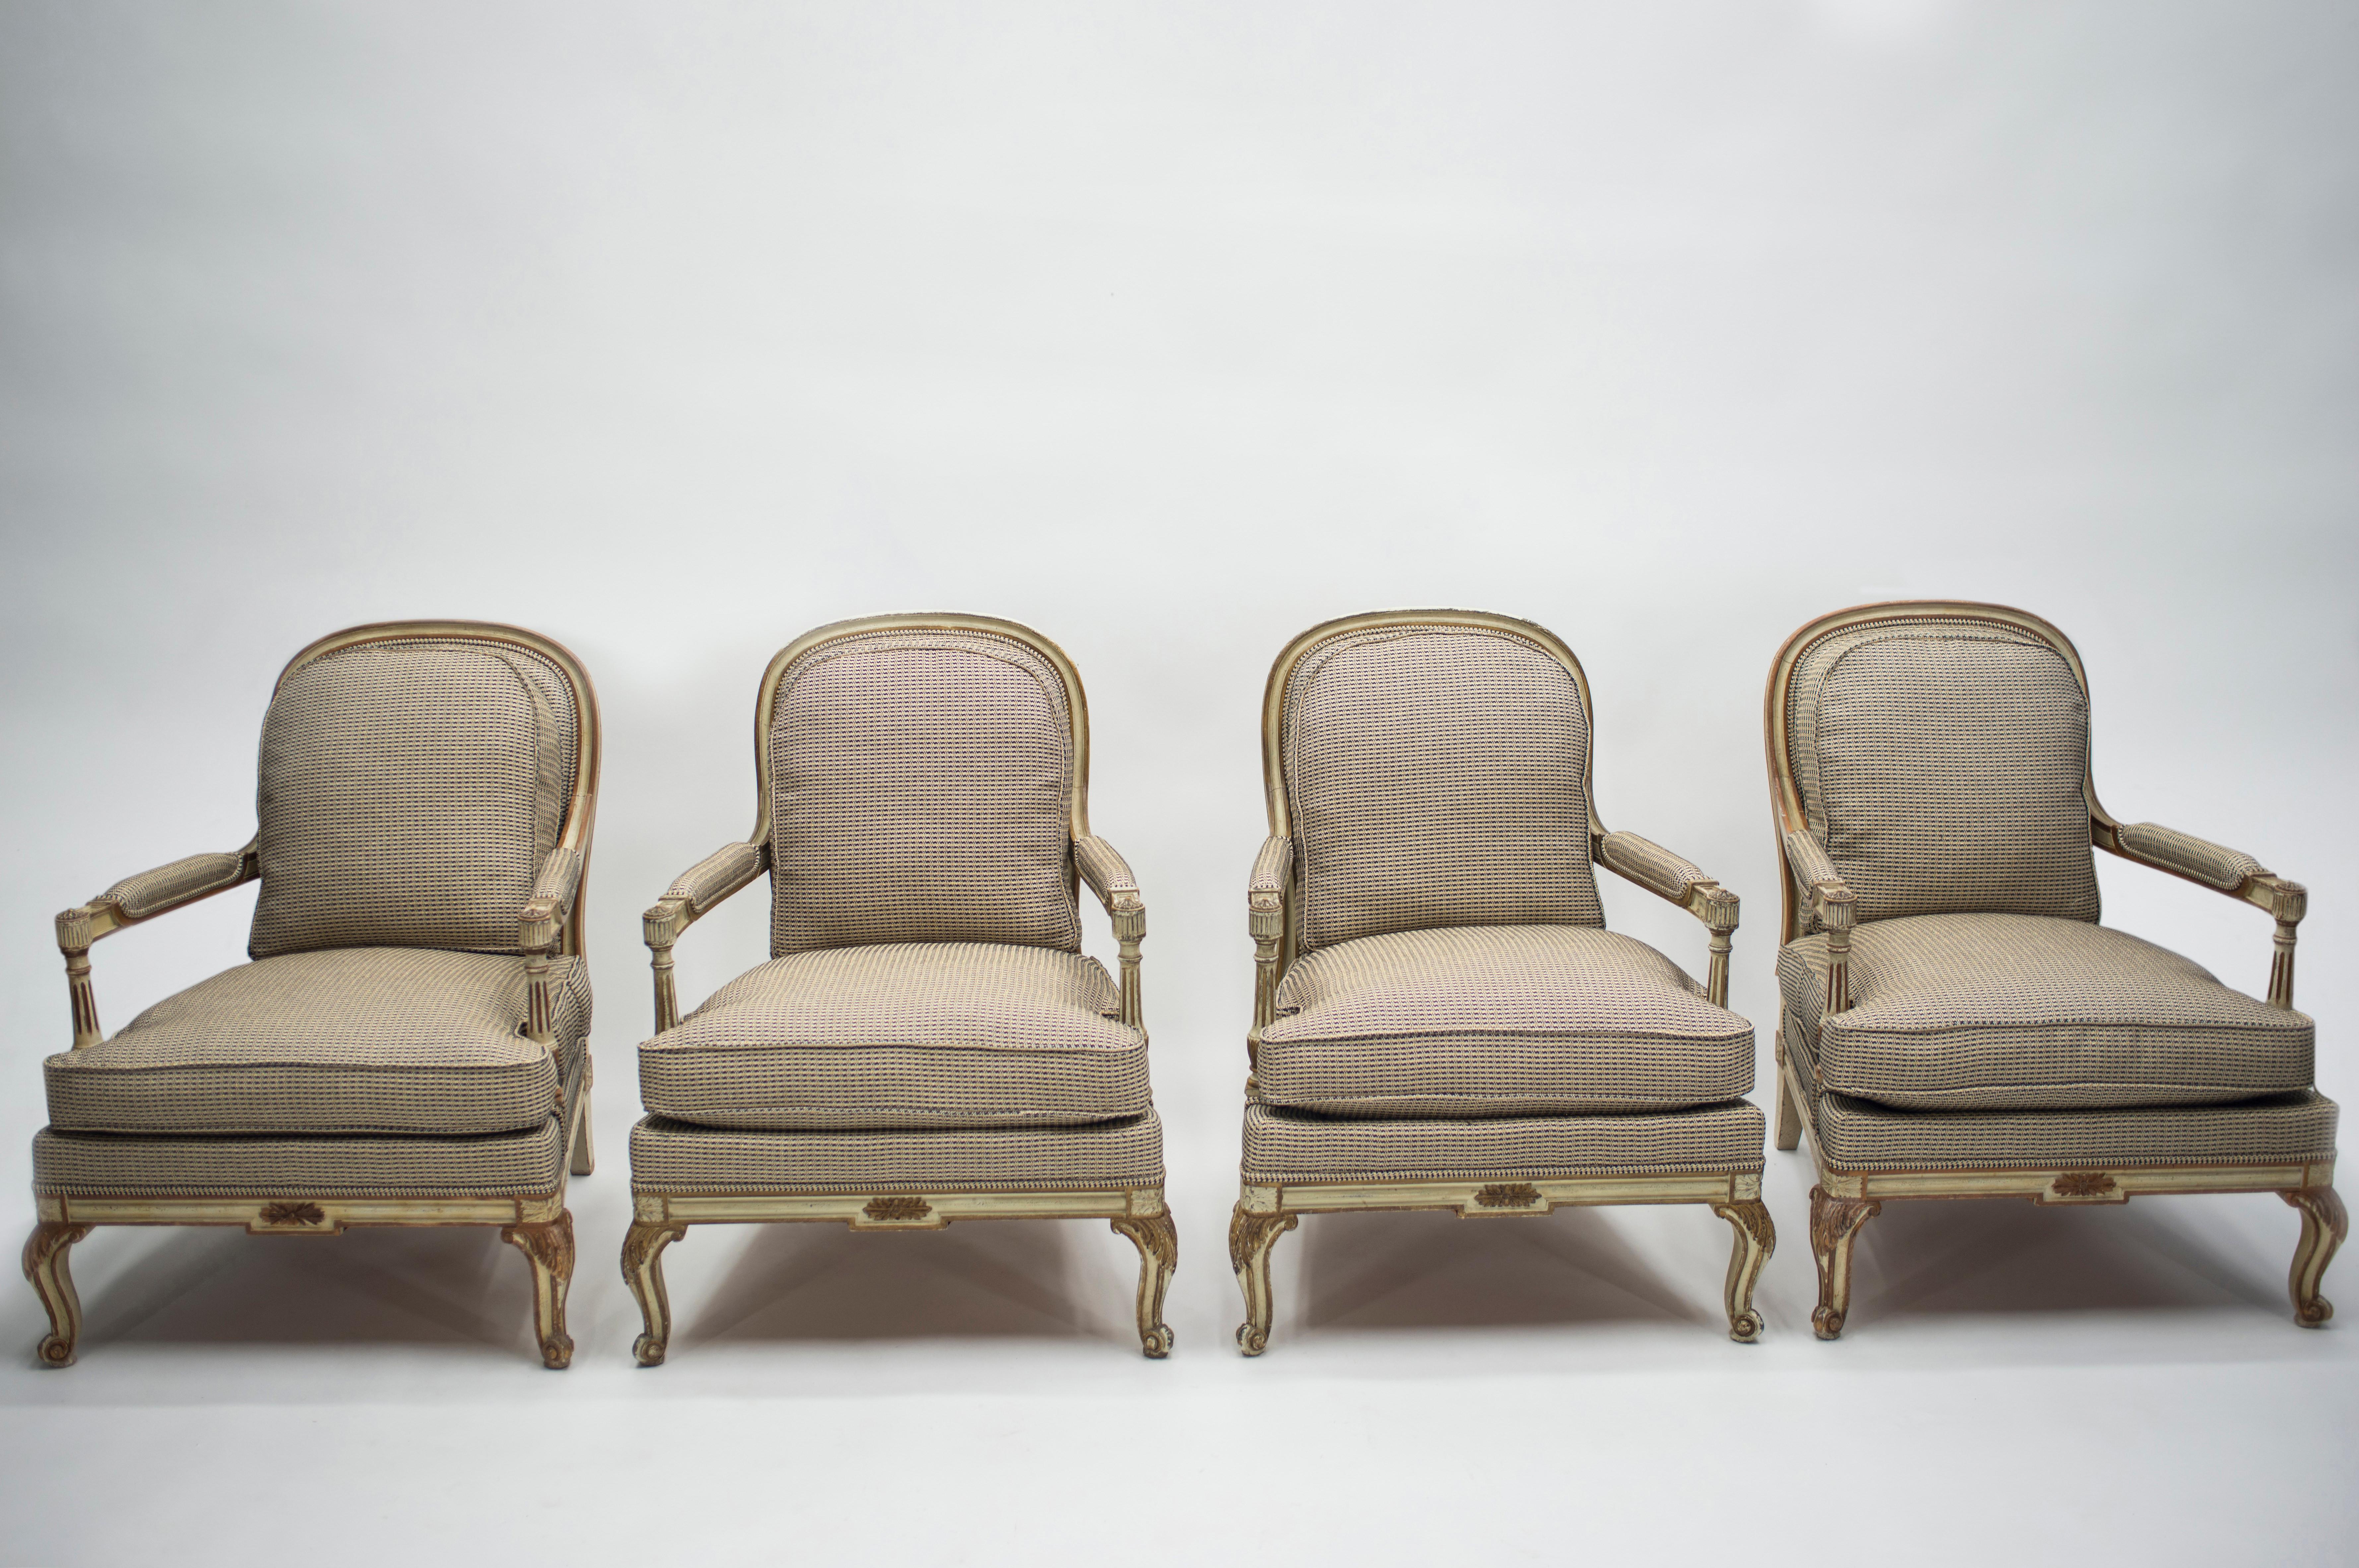 Every moment of the construction of this set of chairs was deeply cared about, and it shows in the finished product, even some six decades later. The set was designed and signed by French furniture designer Maurice Hirsch in the 1970s and was